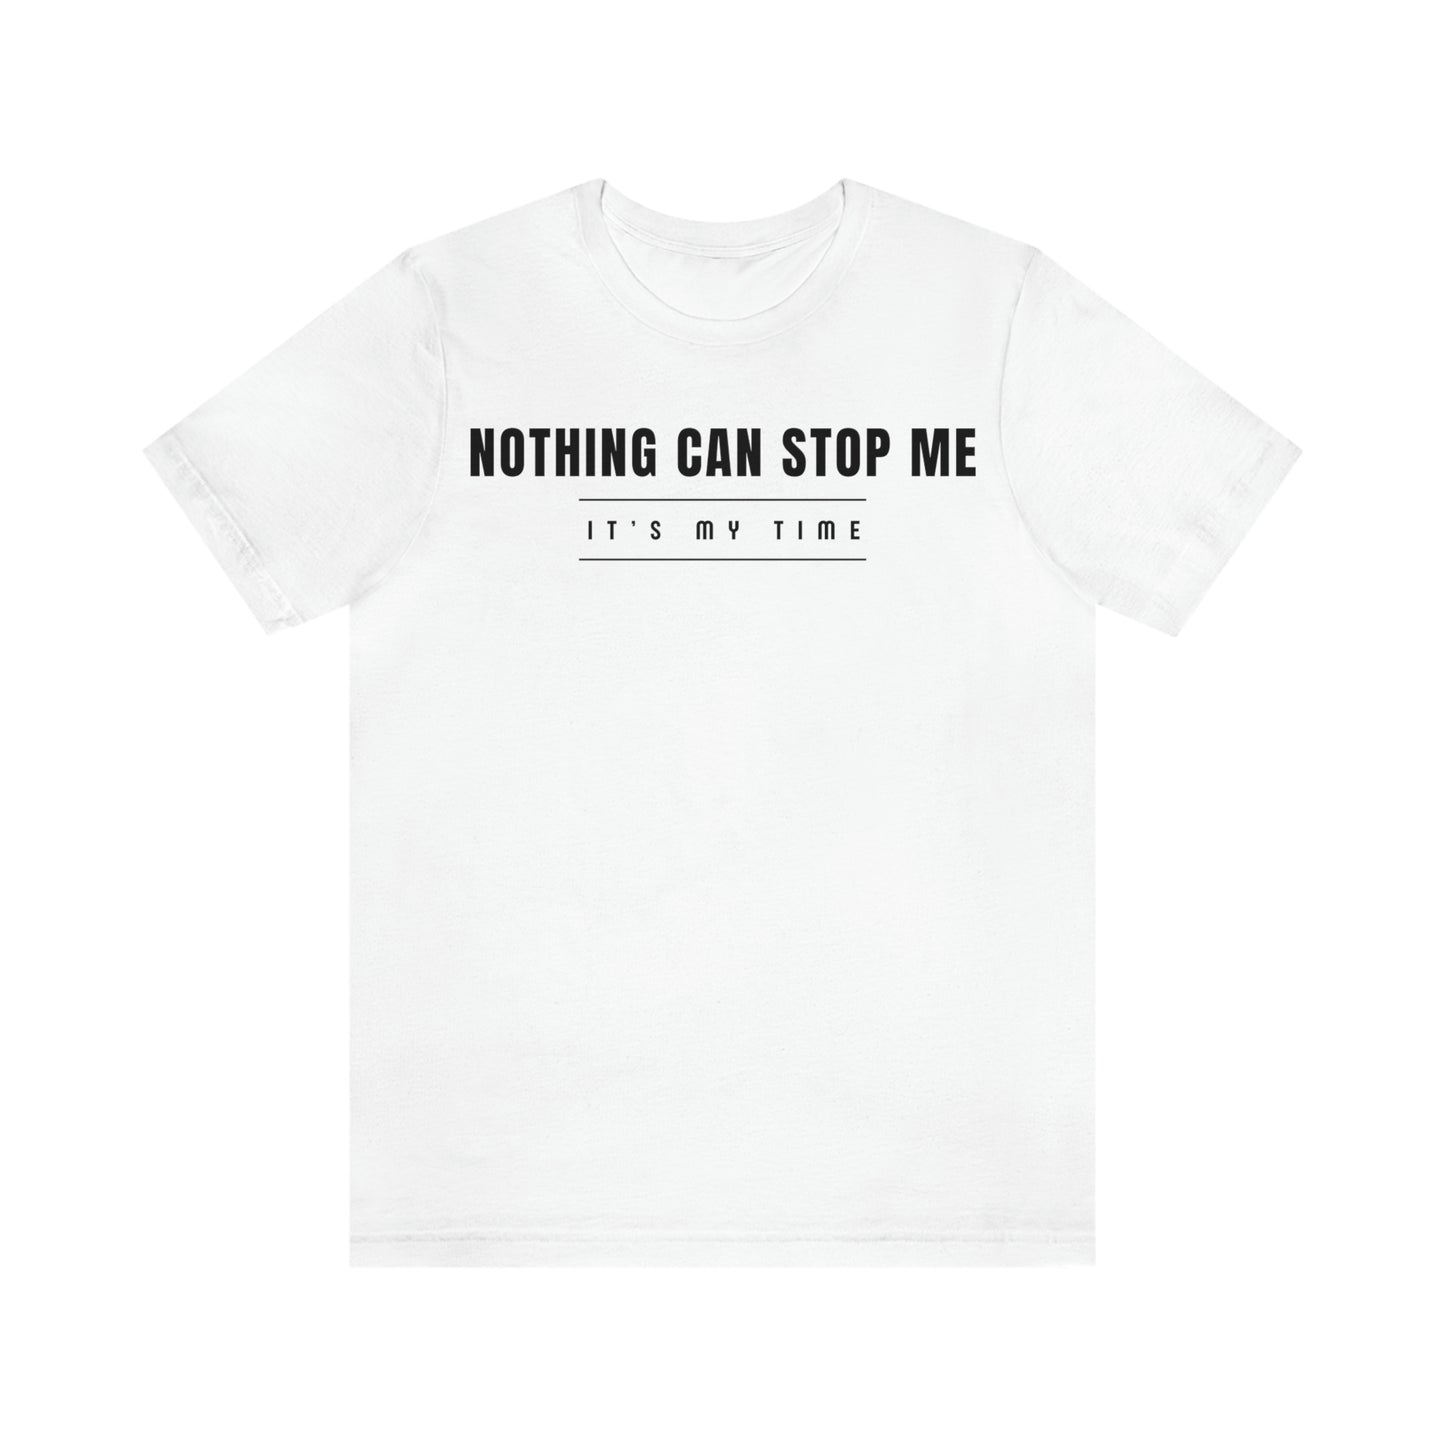 The “Nothing Can Stop Me” T-Shirt